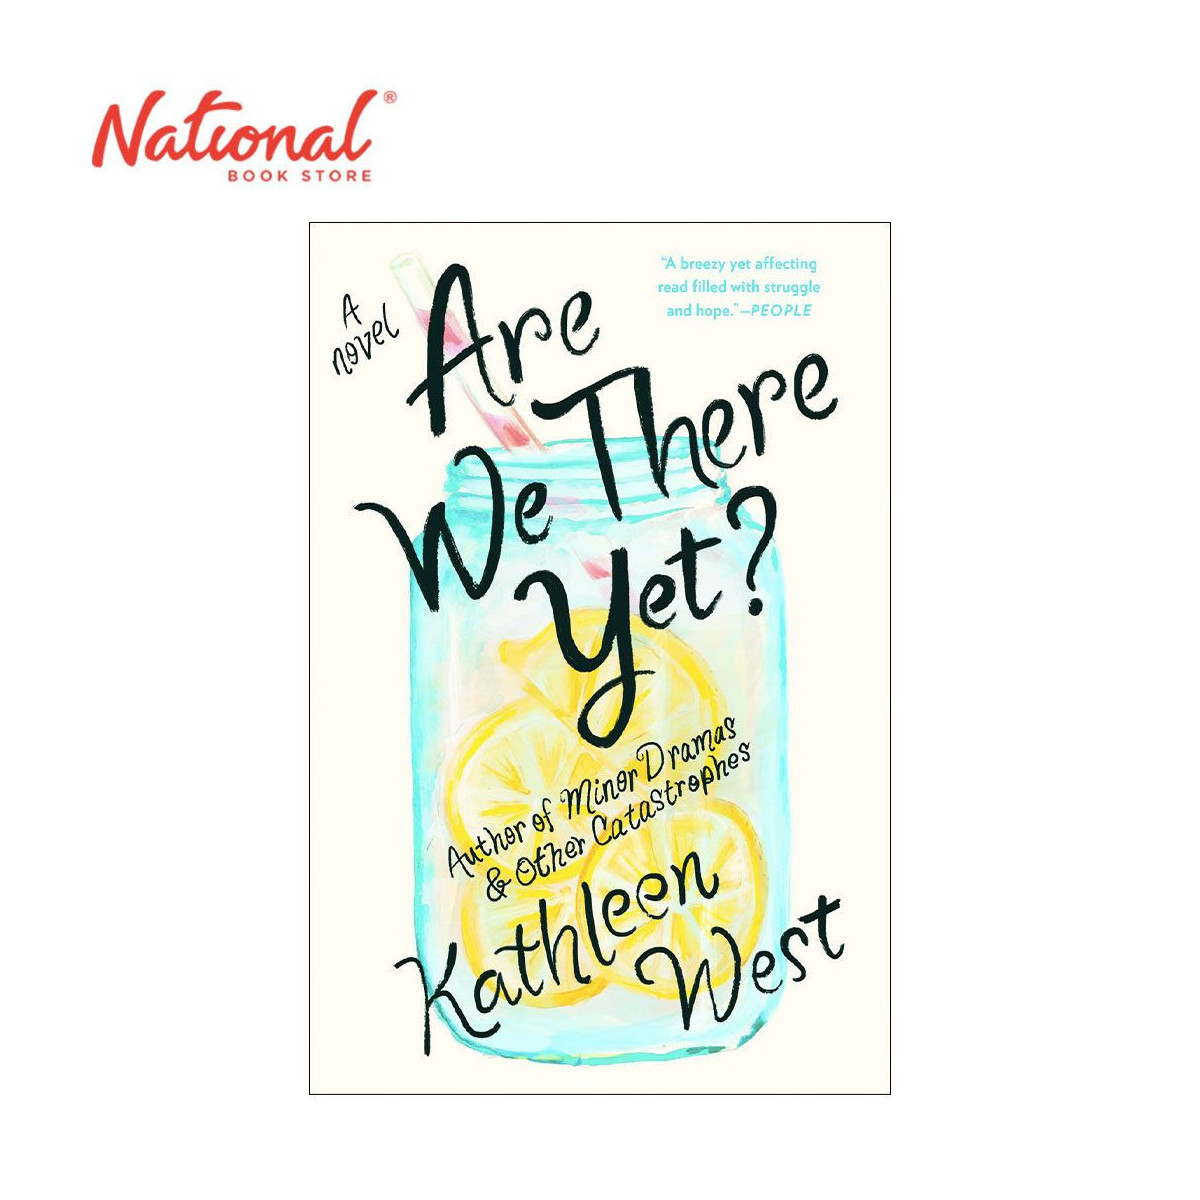 Are We There Yet?: A Novel by Kathleen West - Trade Paperback - Contemporary Fiction